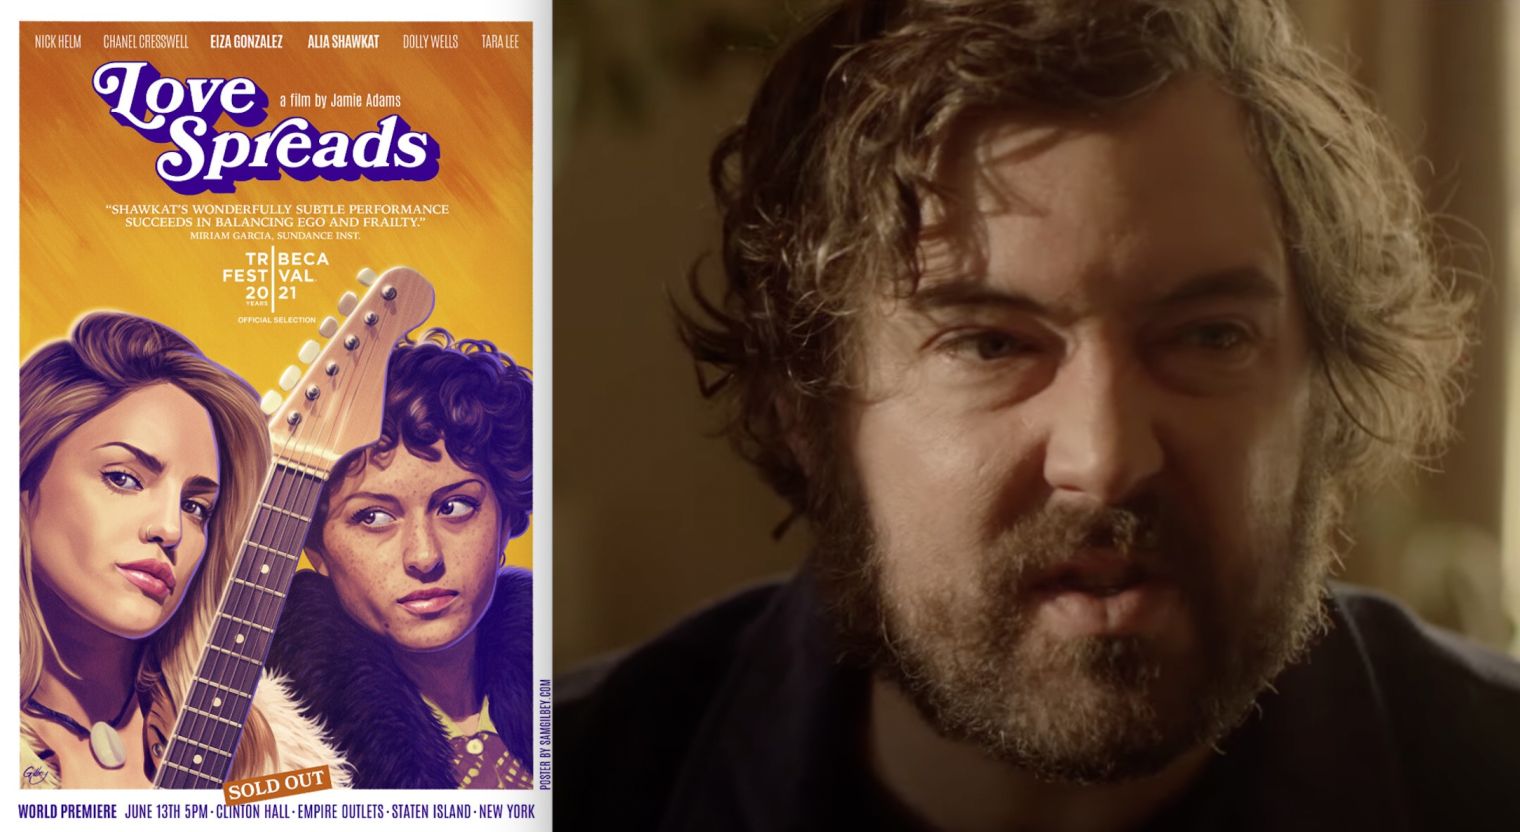 New comedy film Love Spreads, starring Nick Helm, is available to stream in the UK from today